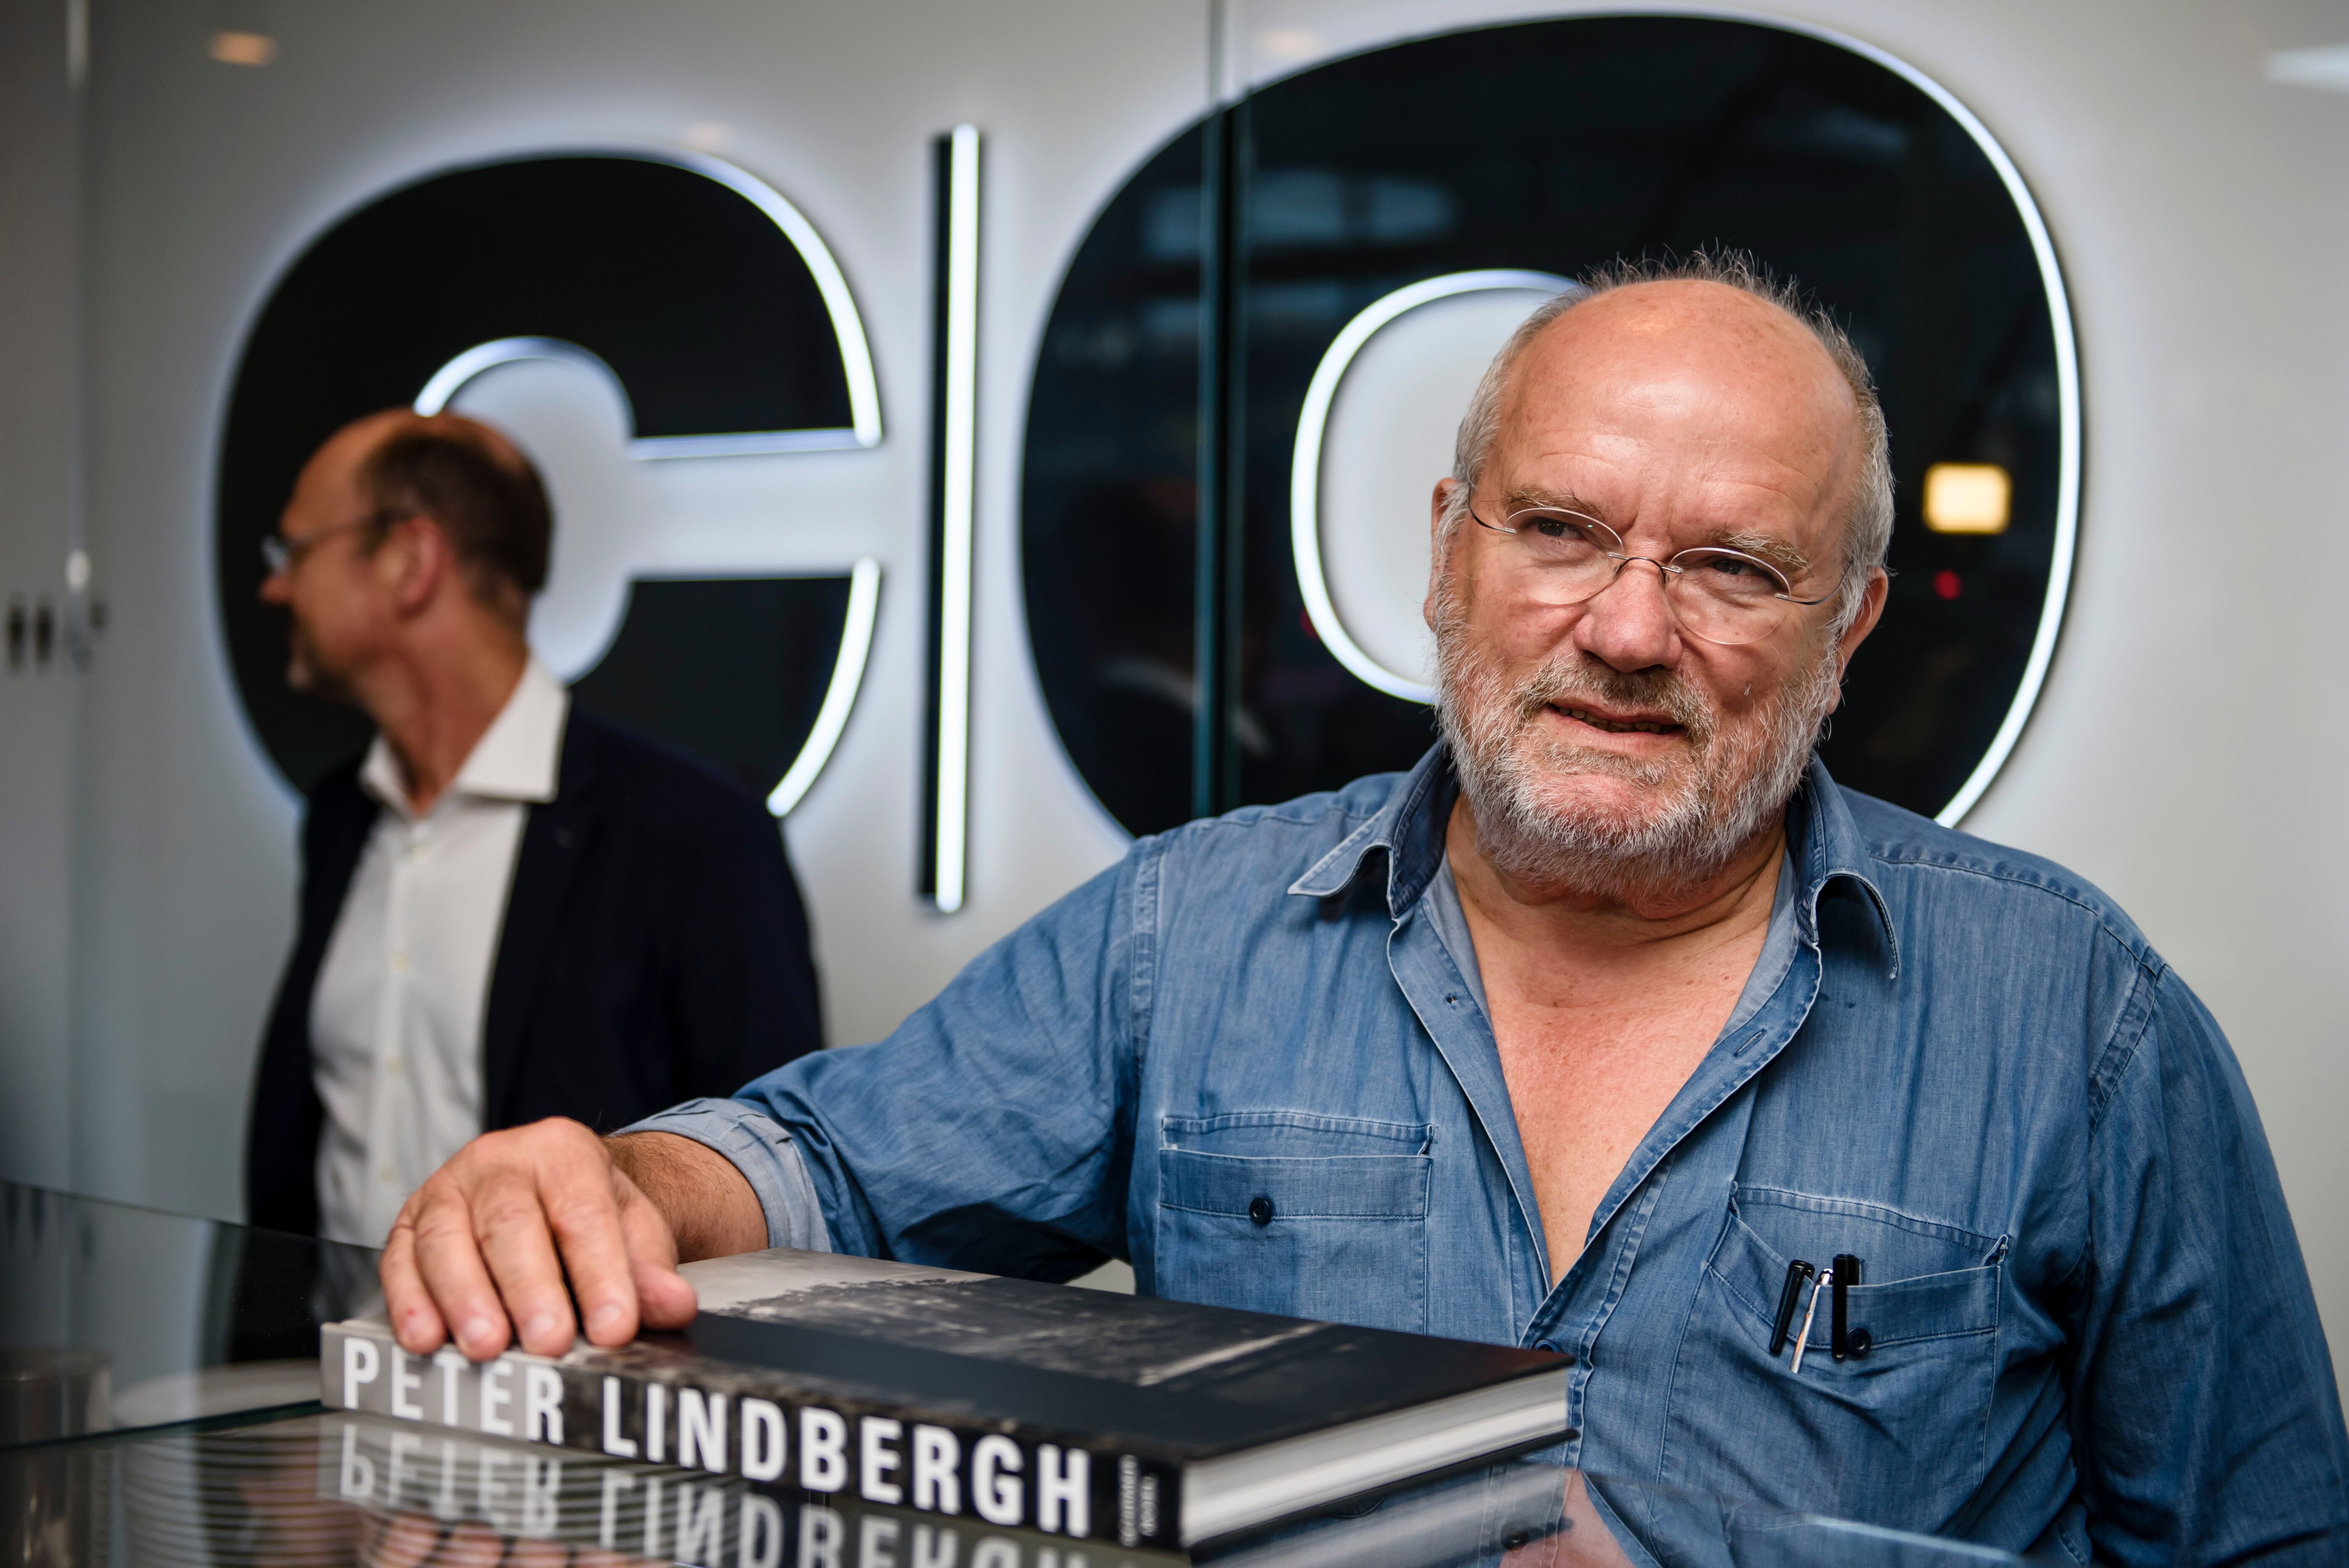 Peter Lindbergh at a signing of his book 'Images of Women II' at C/O Berlin gallery  | Getty Images 